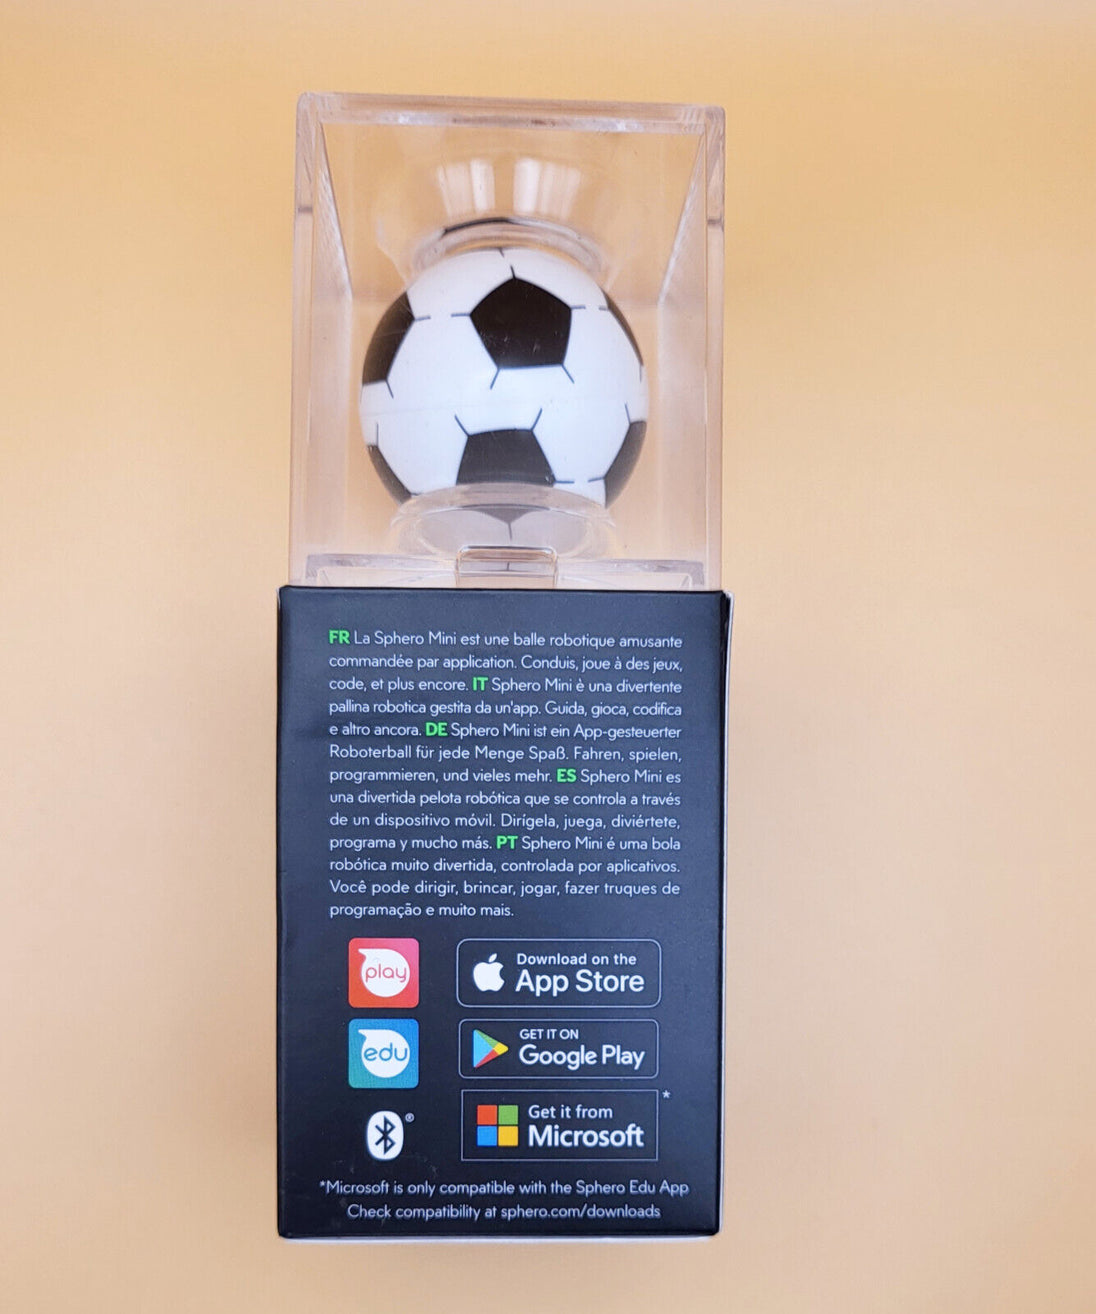 Sphero Mini Soccer: App-Controlled Robot Ball, STEM Learning and Coding Toy, - Chys Thijarah